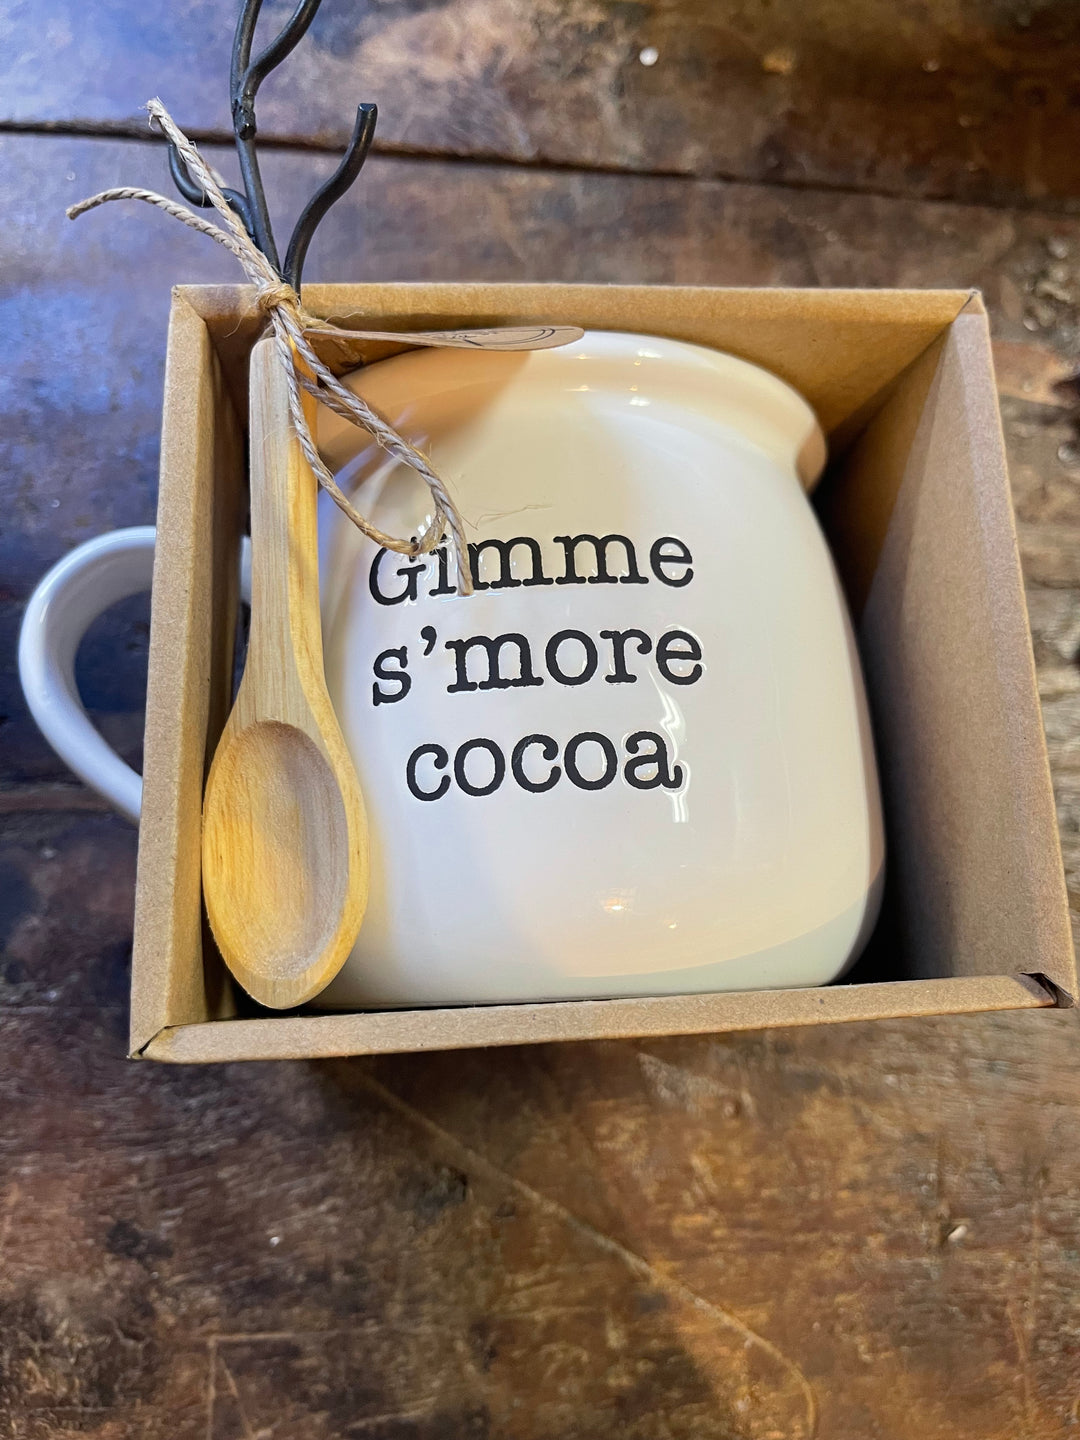 Gimmie S'more Cocoa